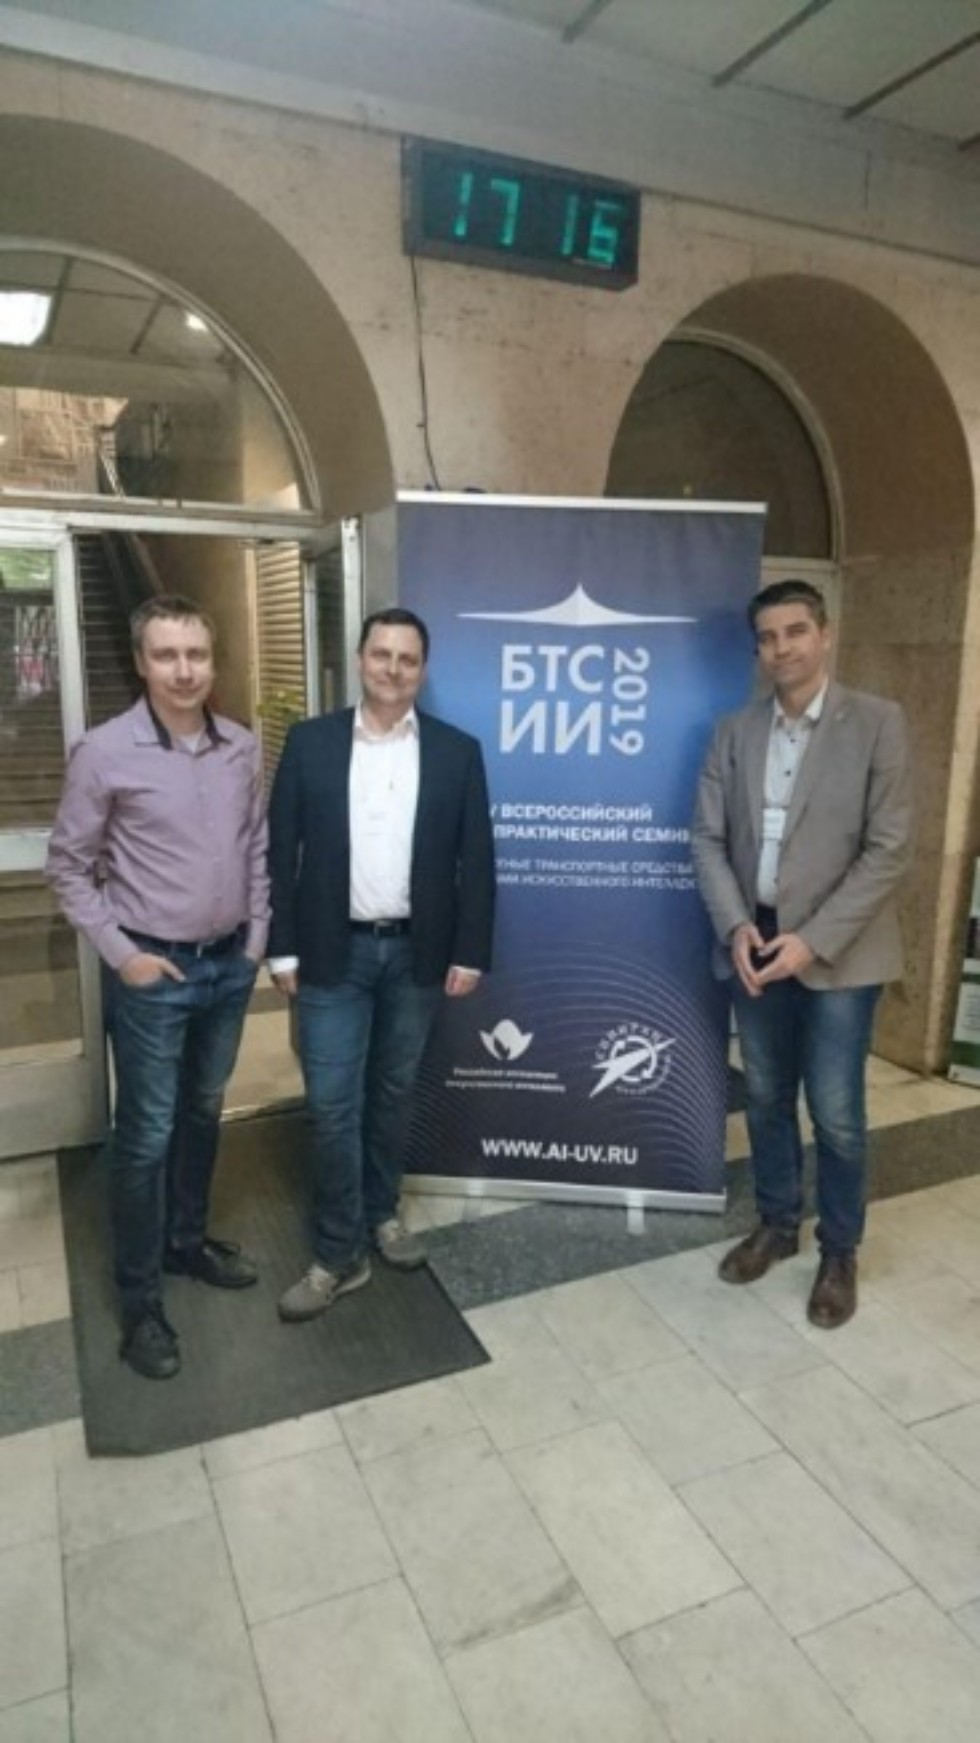 LIRS participated in the V Pan-Russian Research and Practice Workshop on Unmanned vehicles ,Conference, Robotics, Artificial Intelligence, Laboratory of Intelligent Robotic Systems,LIRS, Higher Institute of Information Technologies and Intelligent Systems